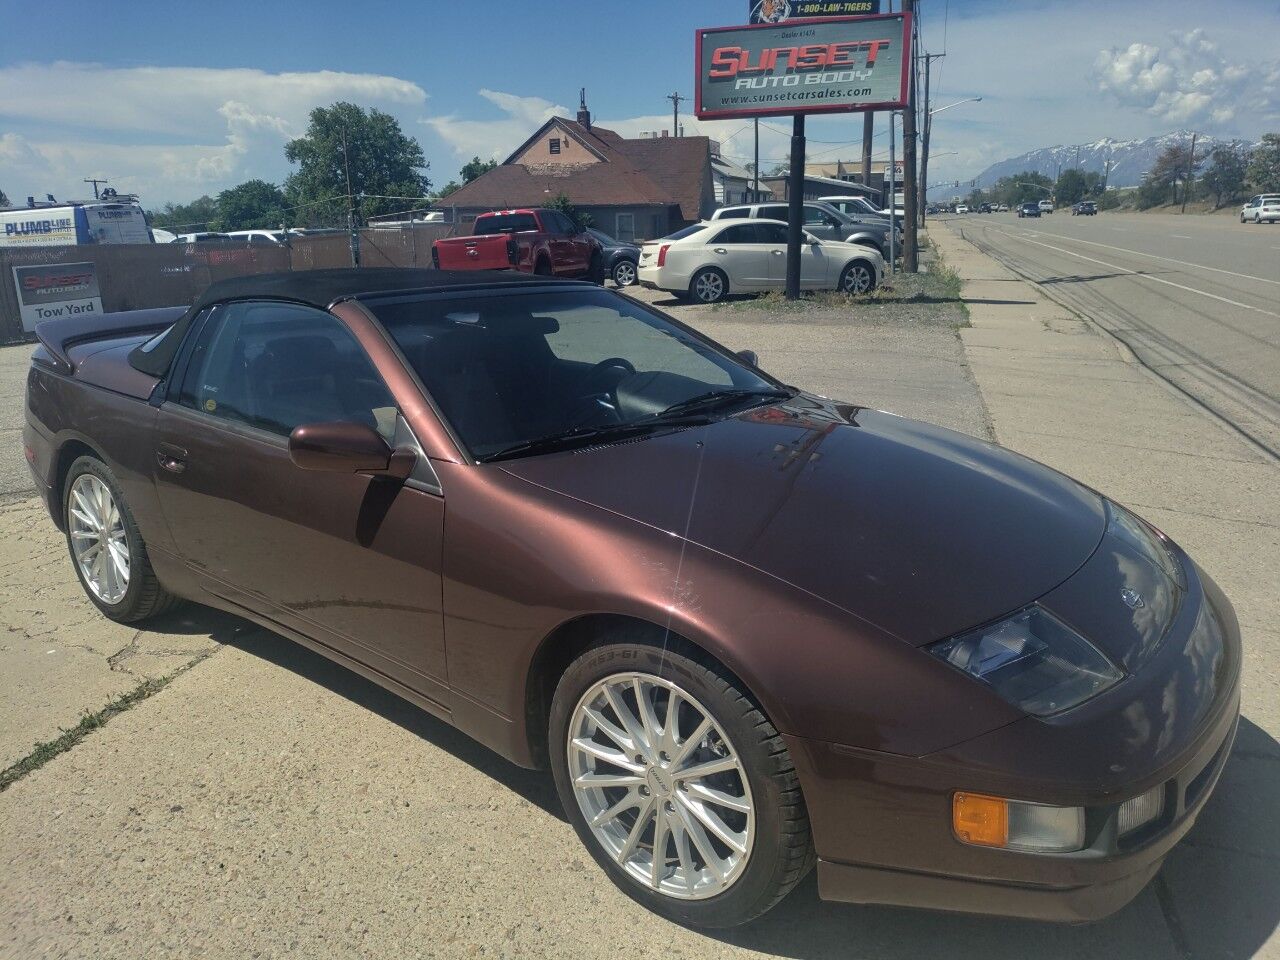 Nissan 300ZX For Sale In Layton, UT - Carsforsale.com®